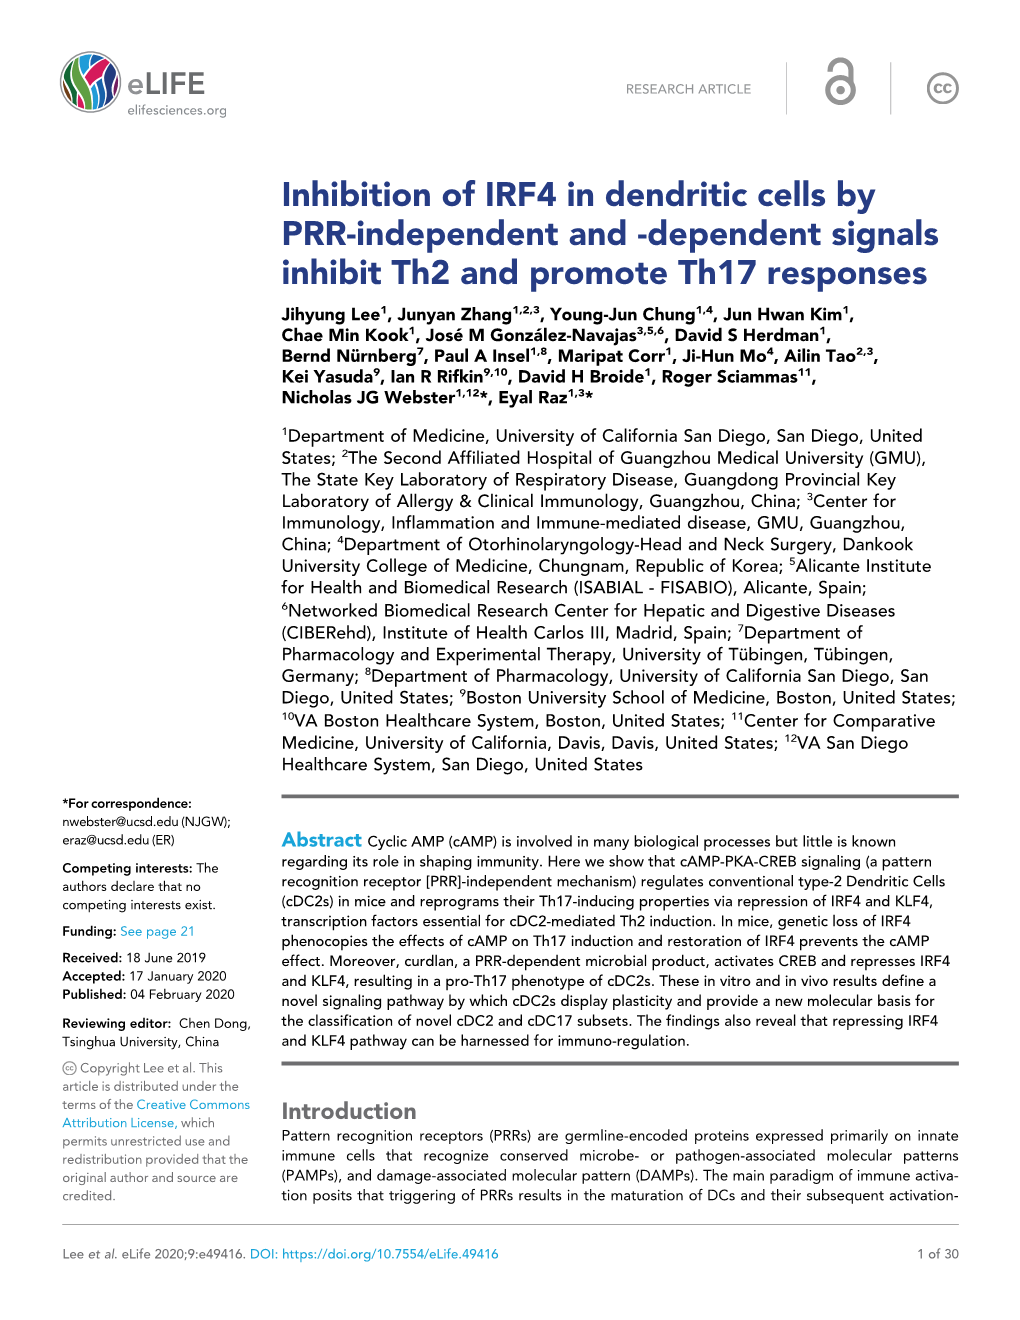 Inhibition of IRF4 in Dendritic Cells by PRR-Independent